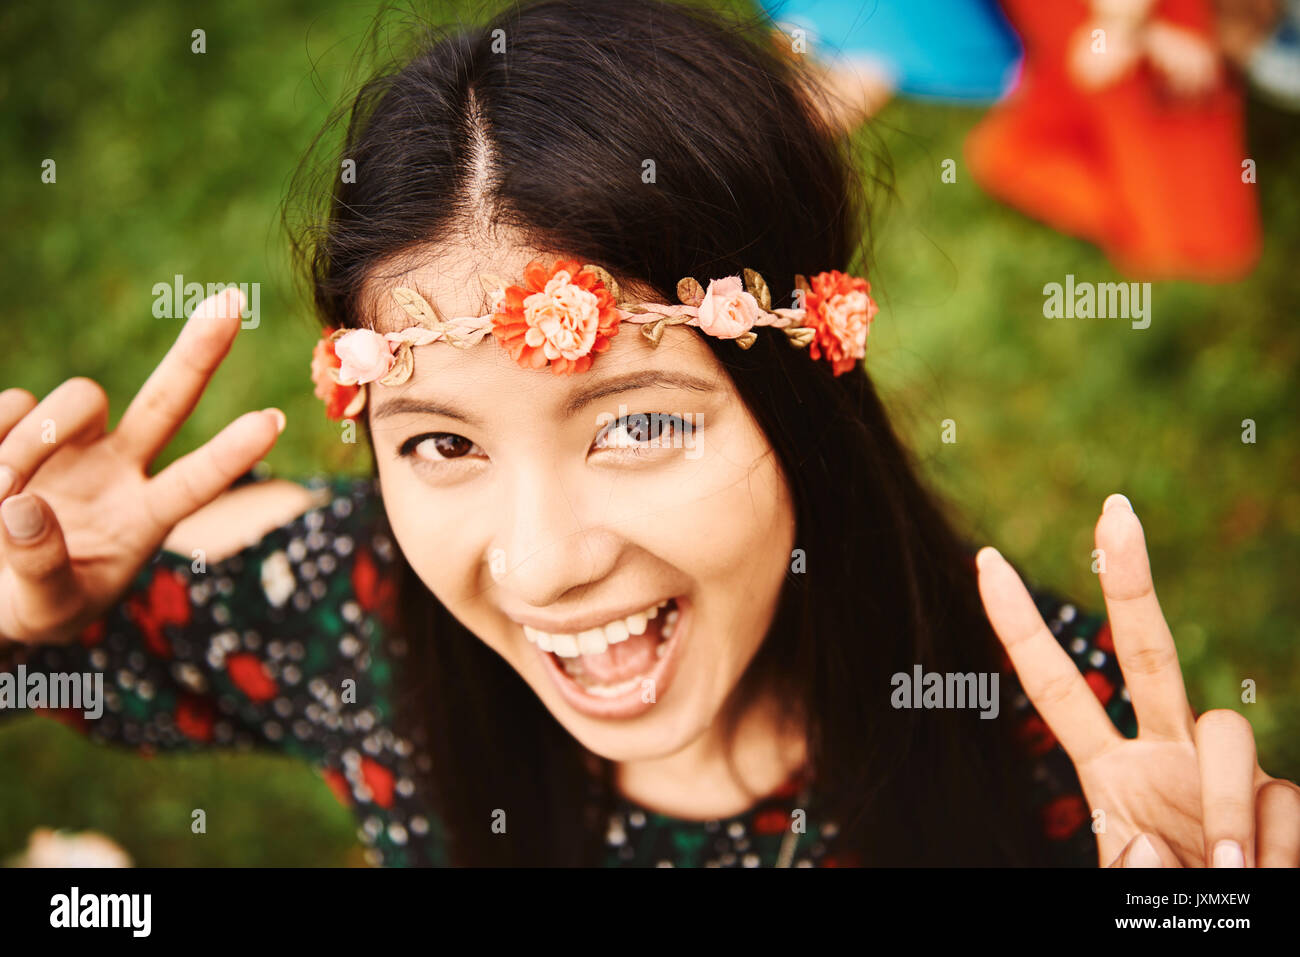 Portrait of young boho woman making peace sign at festival Stock Photo